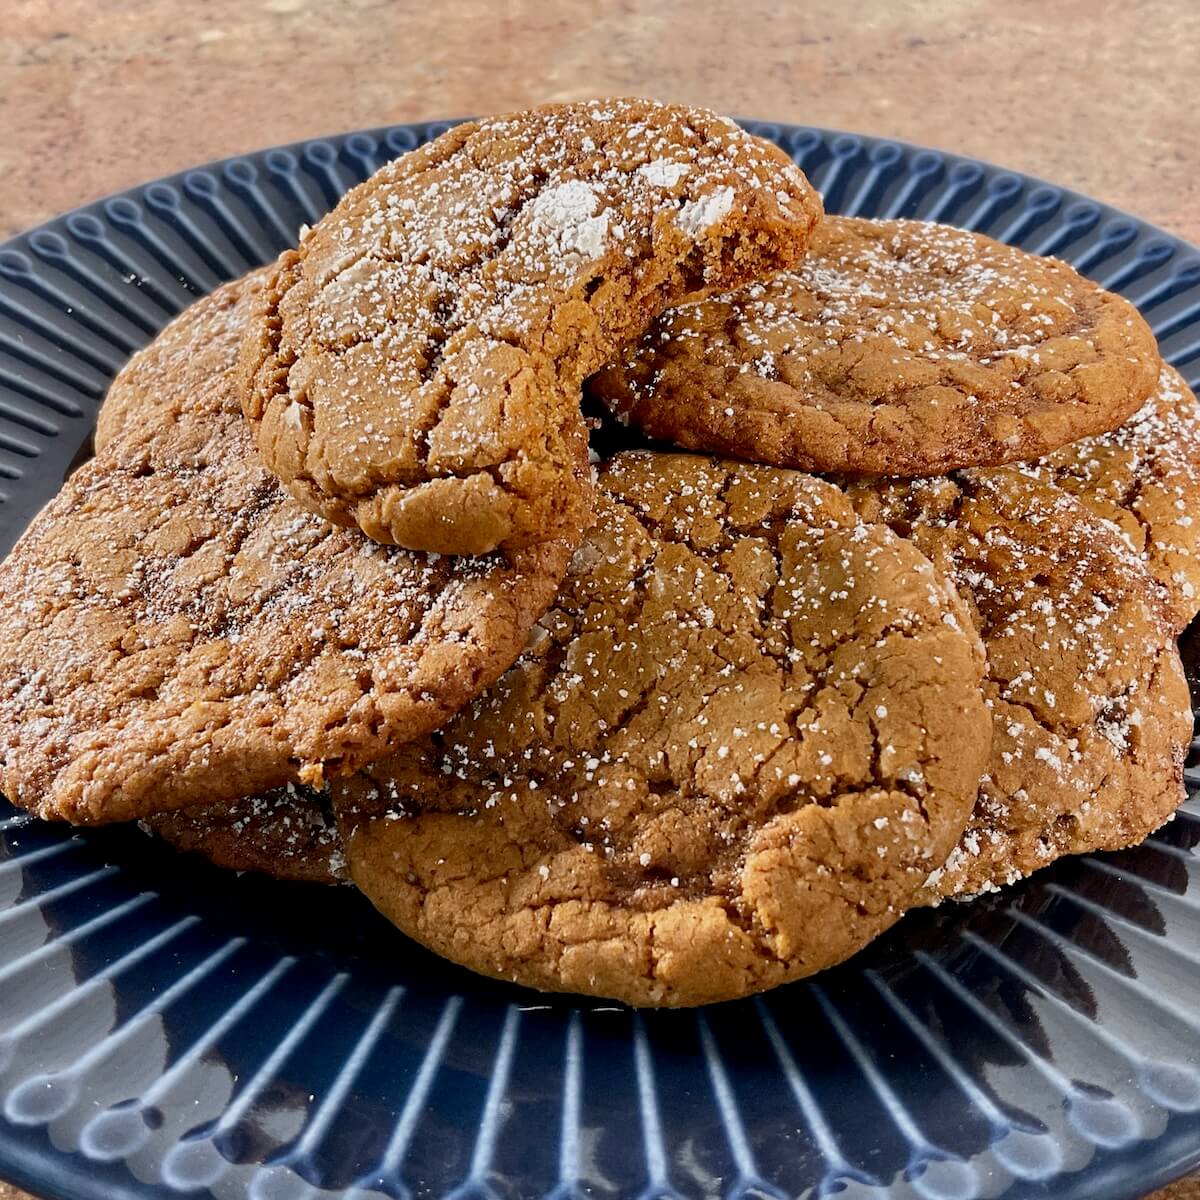 Molasses cookies on a blue plate with a bite taken out of the top one.